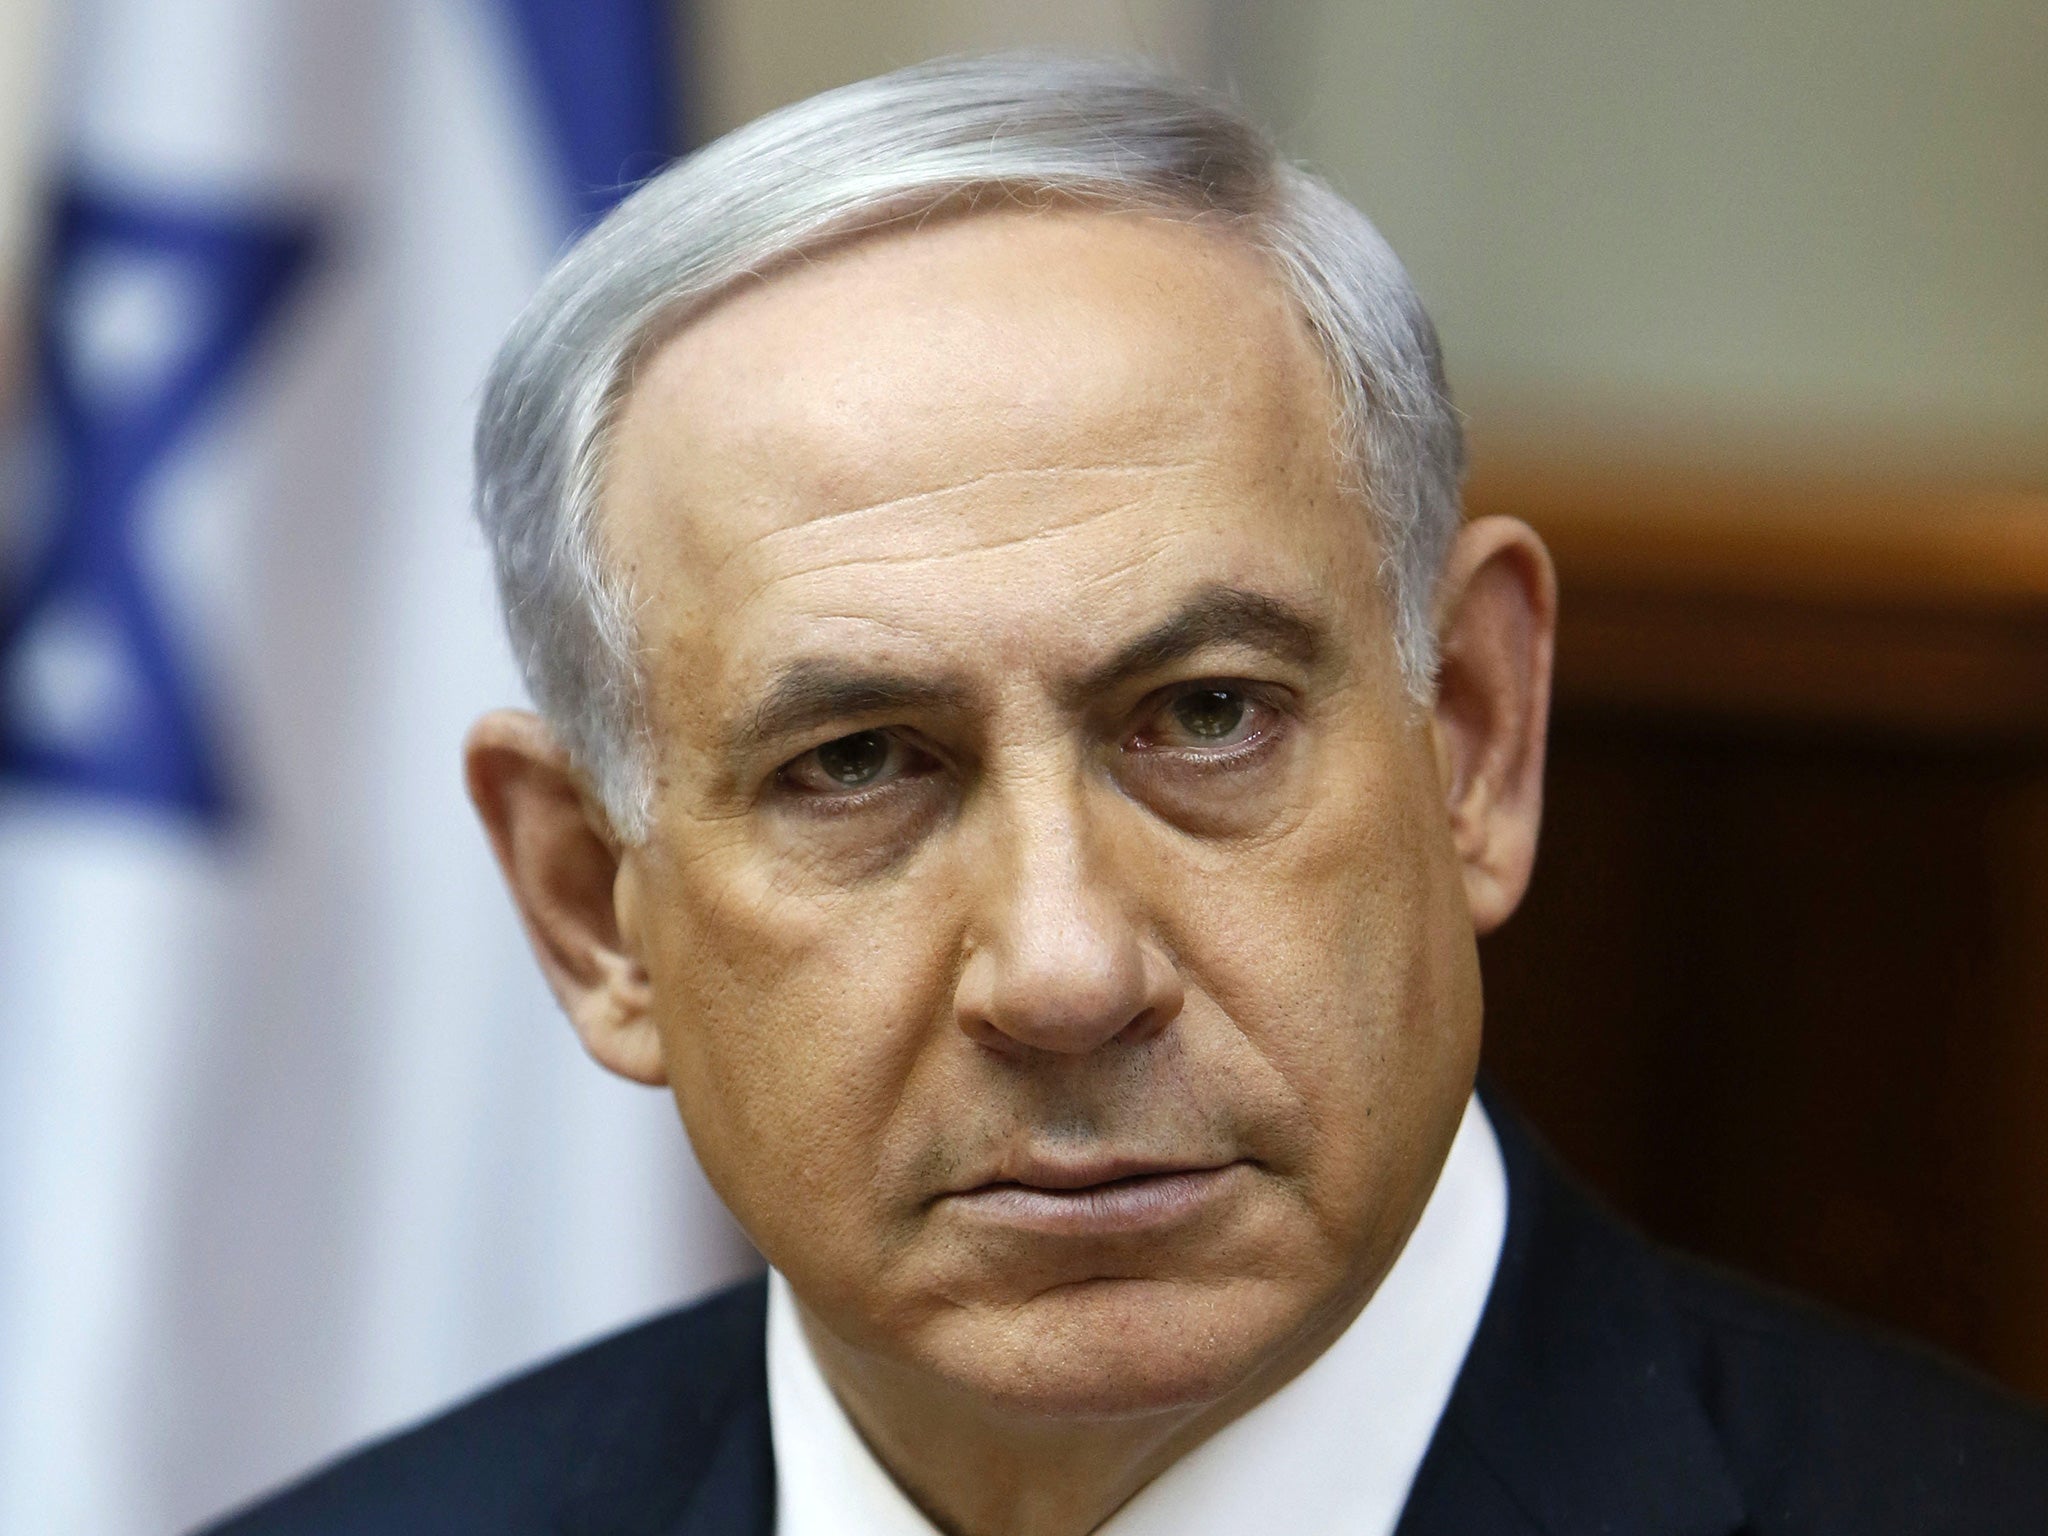 Netanyahu's Likud party threatened legal action over the prank